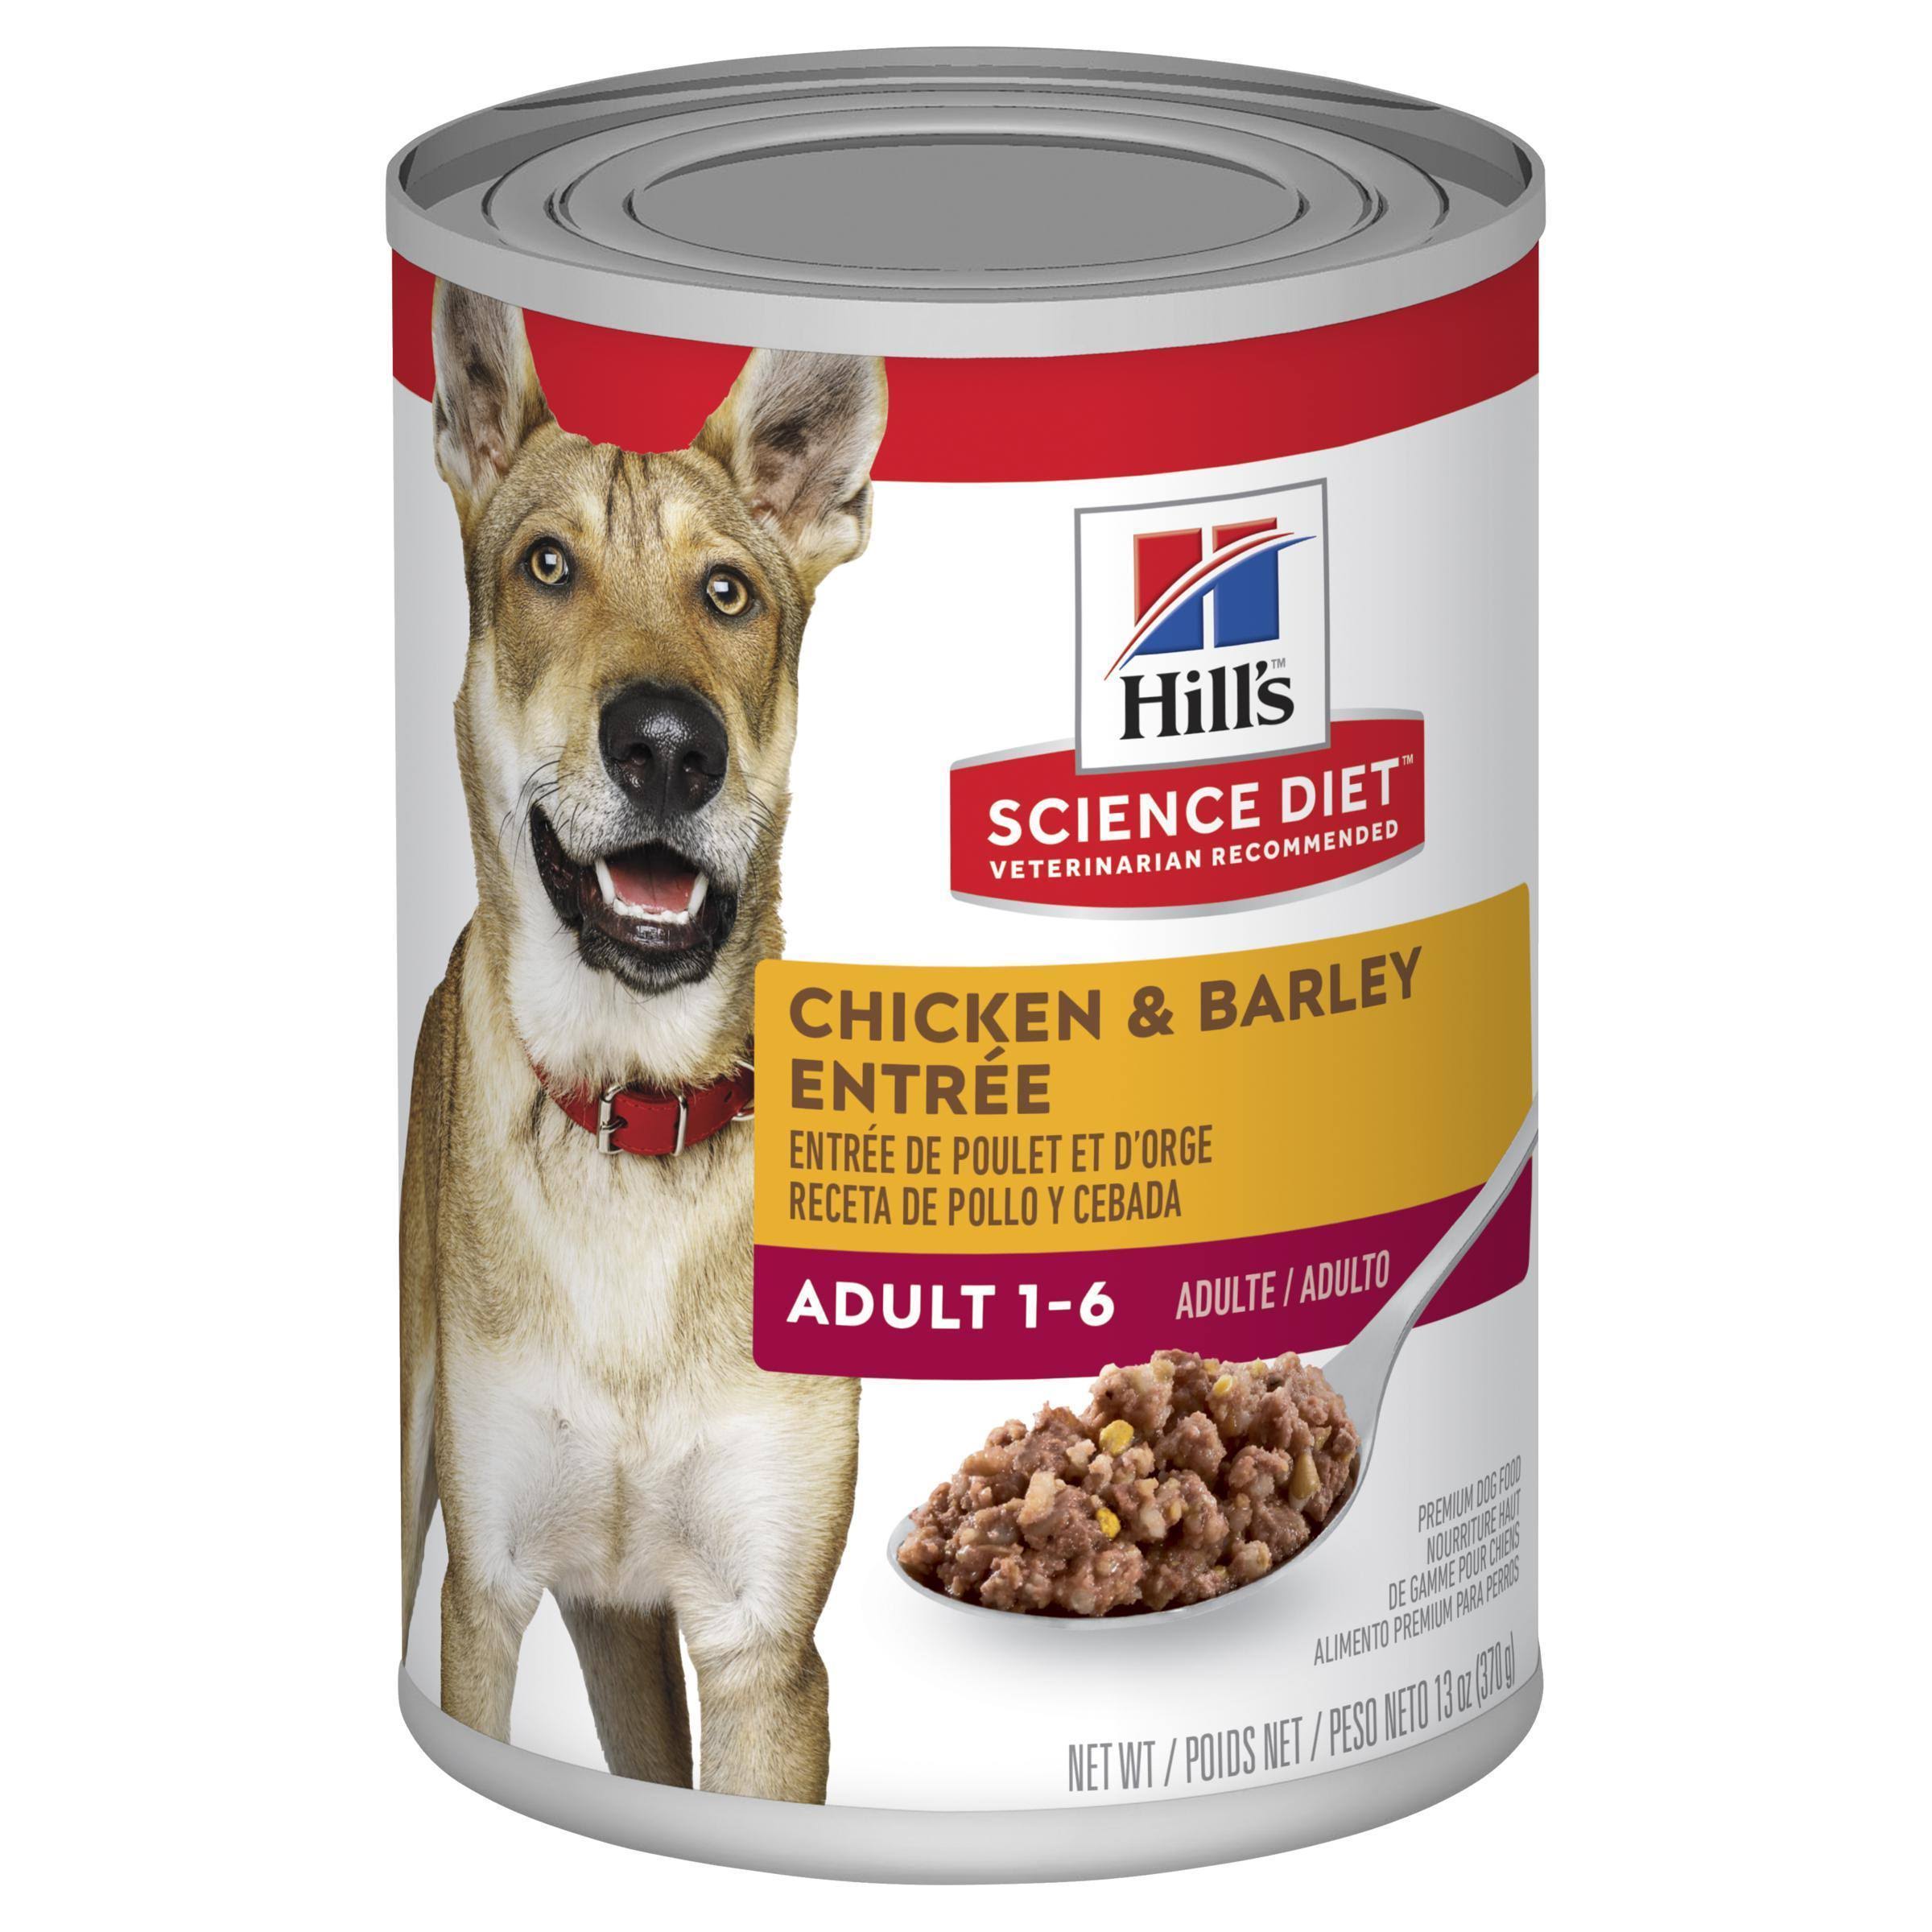 Hill's Science Diet Adult Chicken and Barley Entrée Canned Dog Food - 13oz